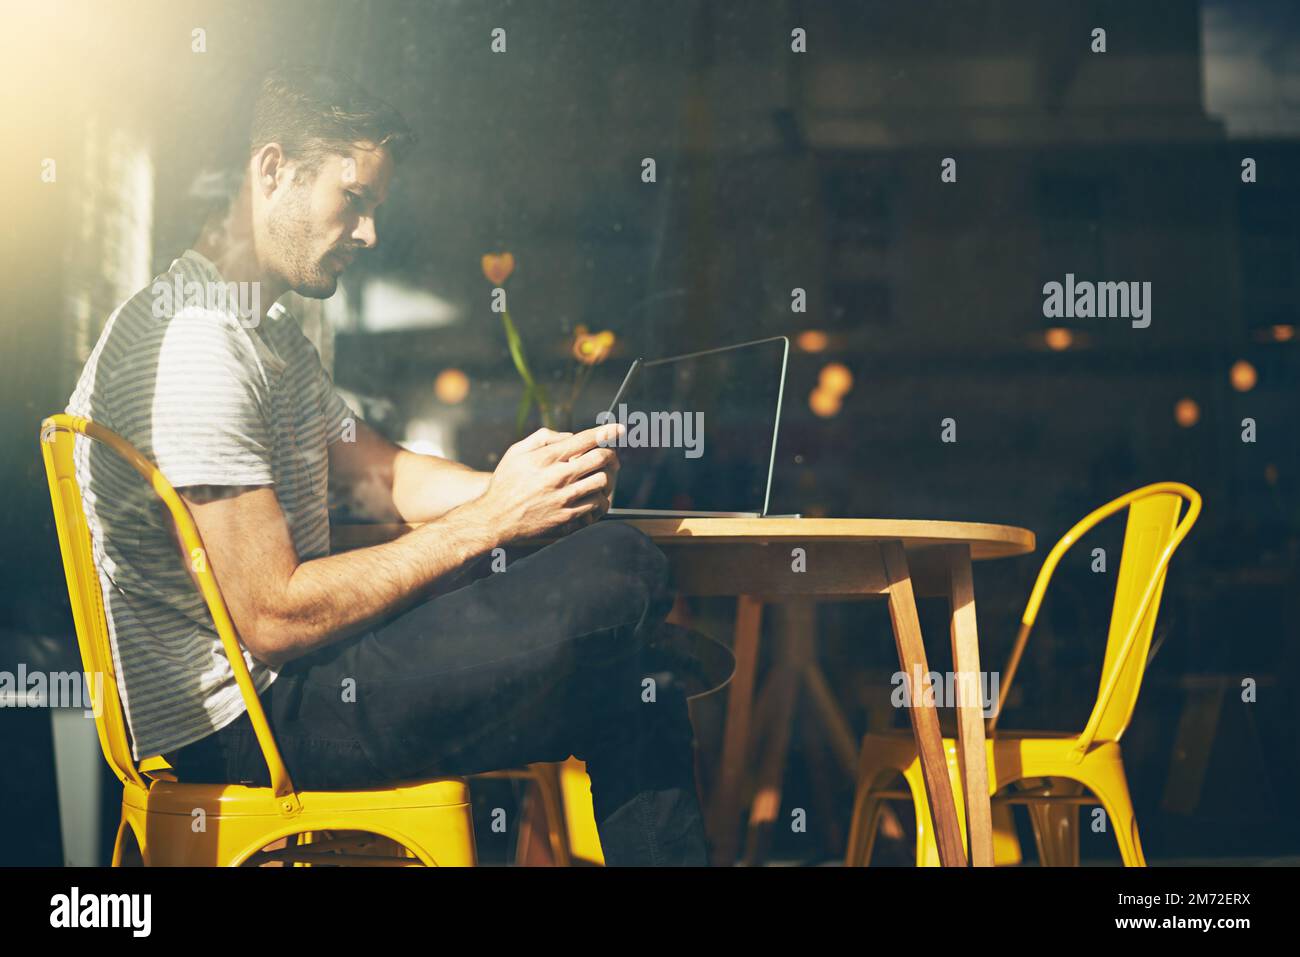 Chilling at his local cafe. A young man using his cellphone in a coffee shop. Stock Photo